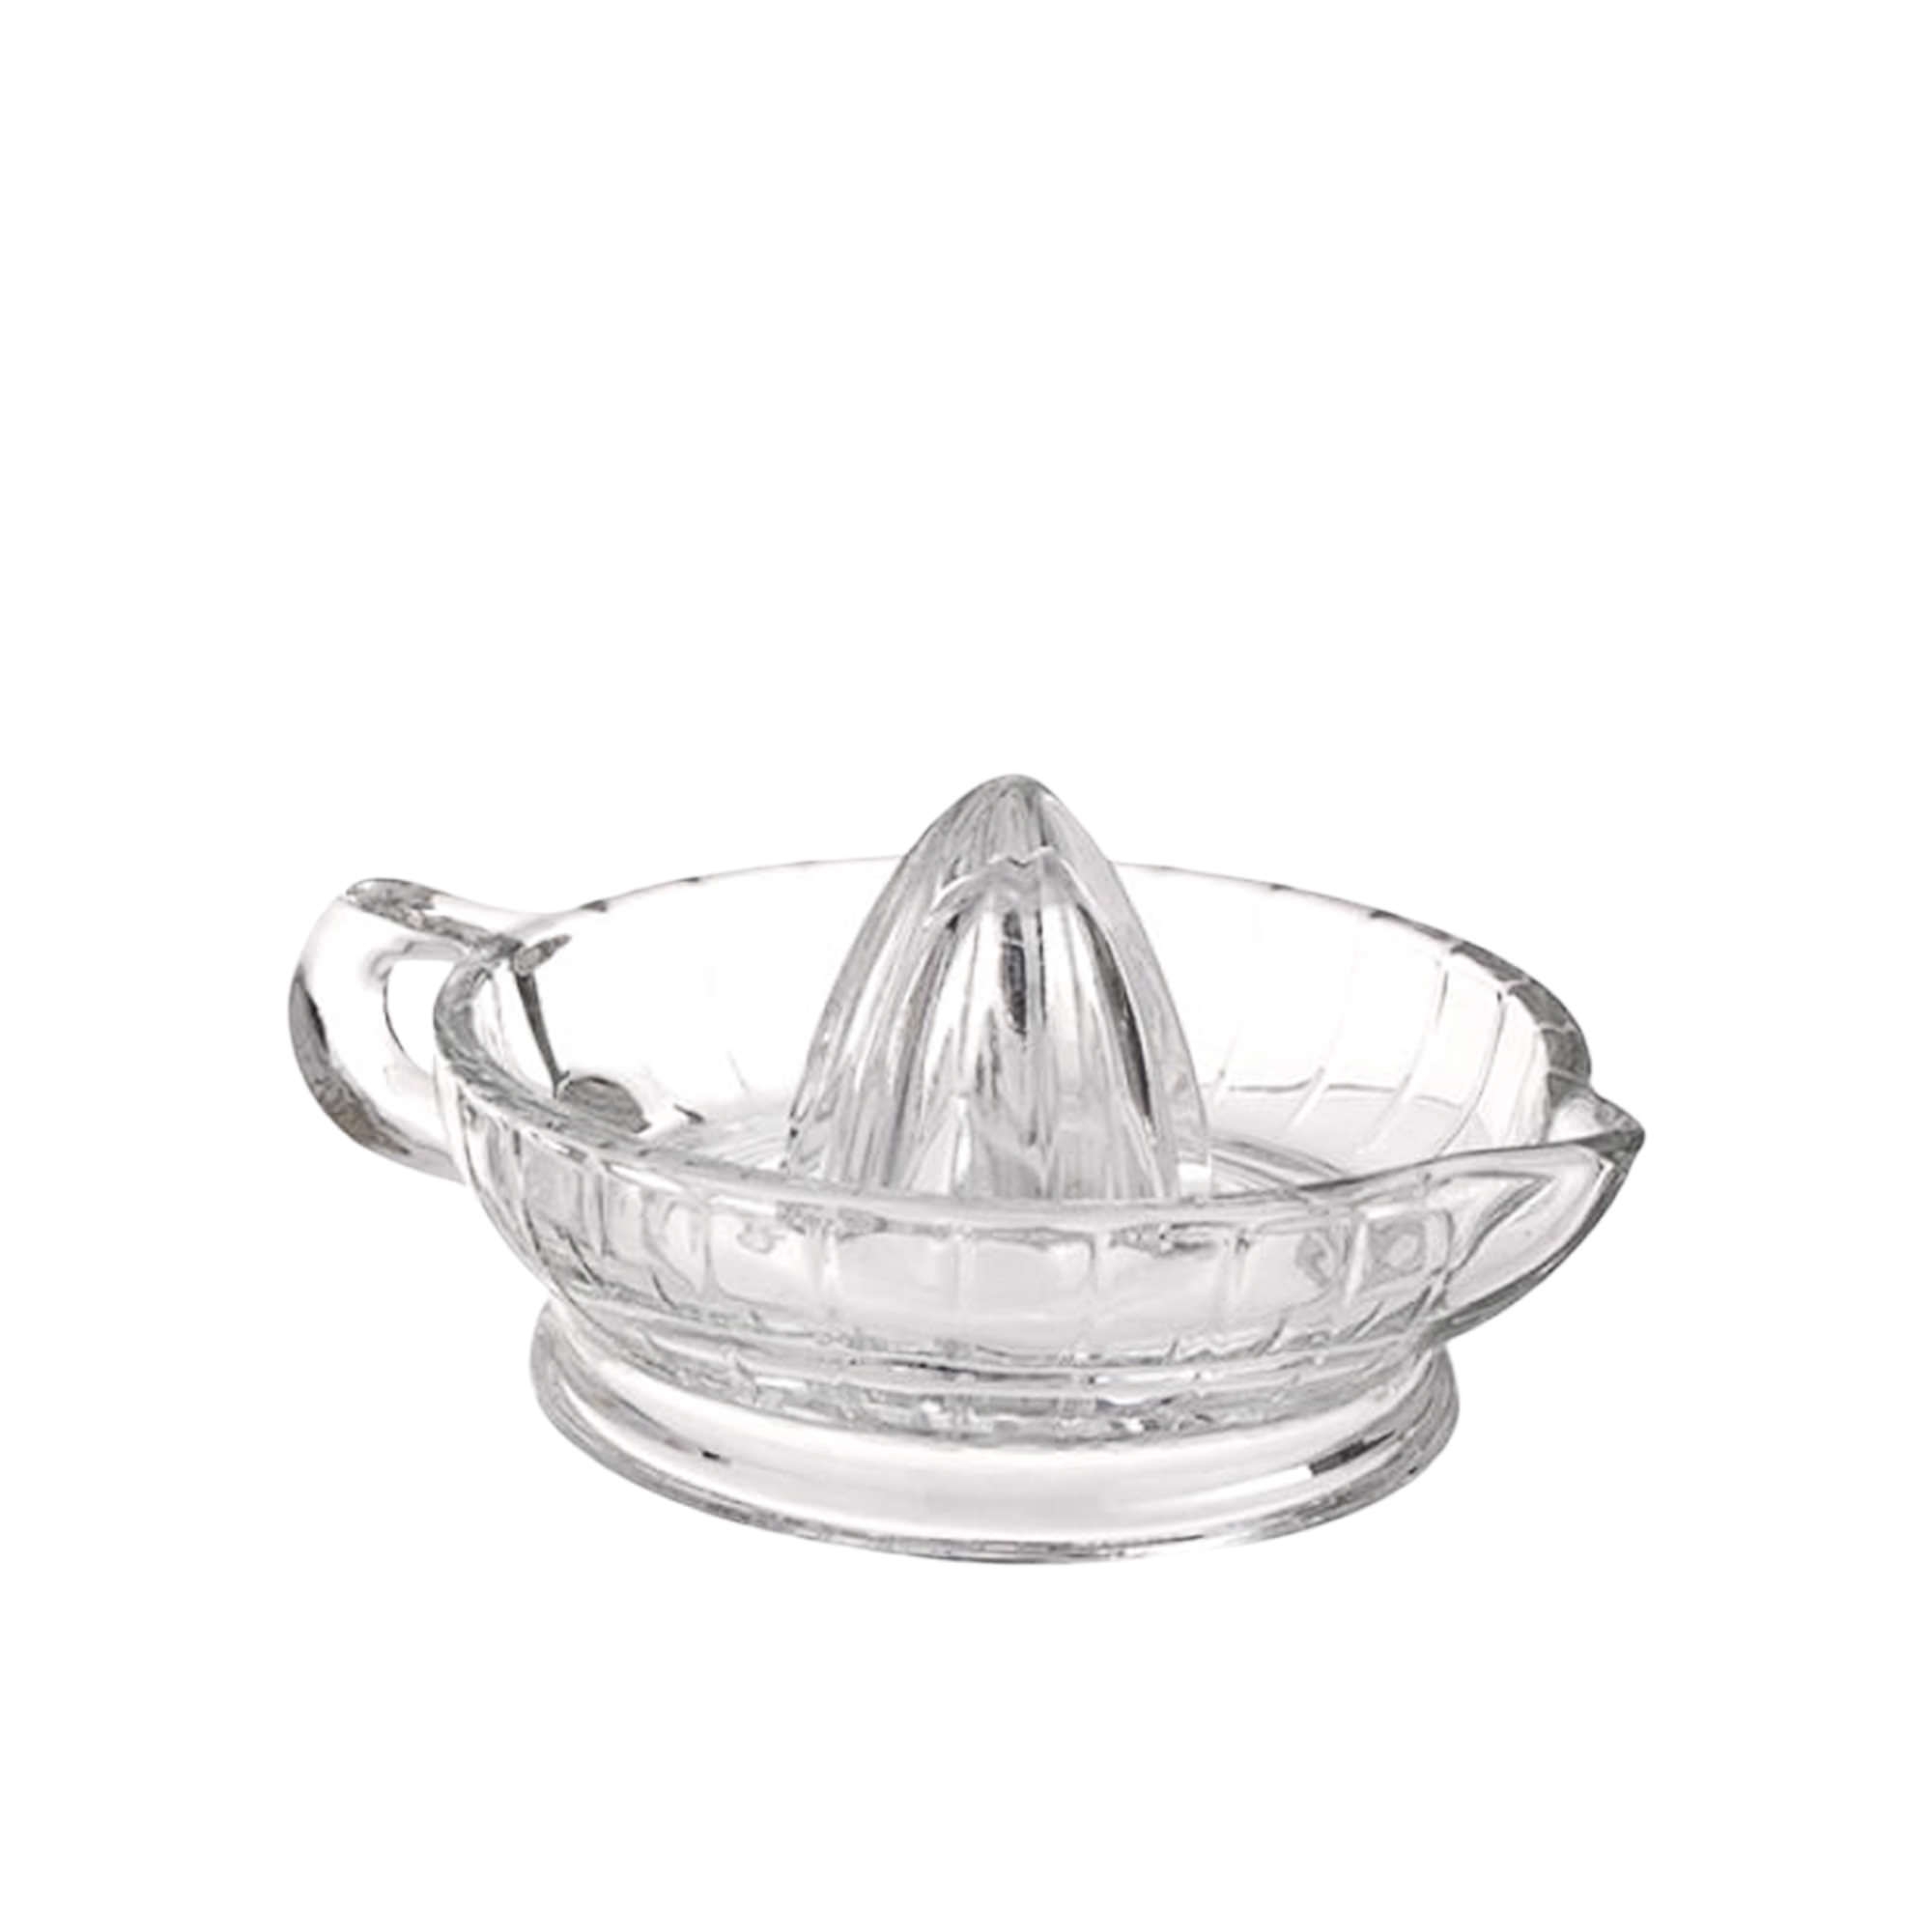 Appetito Glass Juicer Image 1